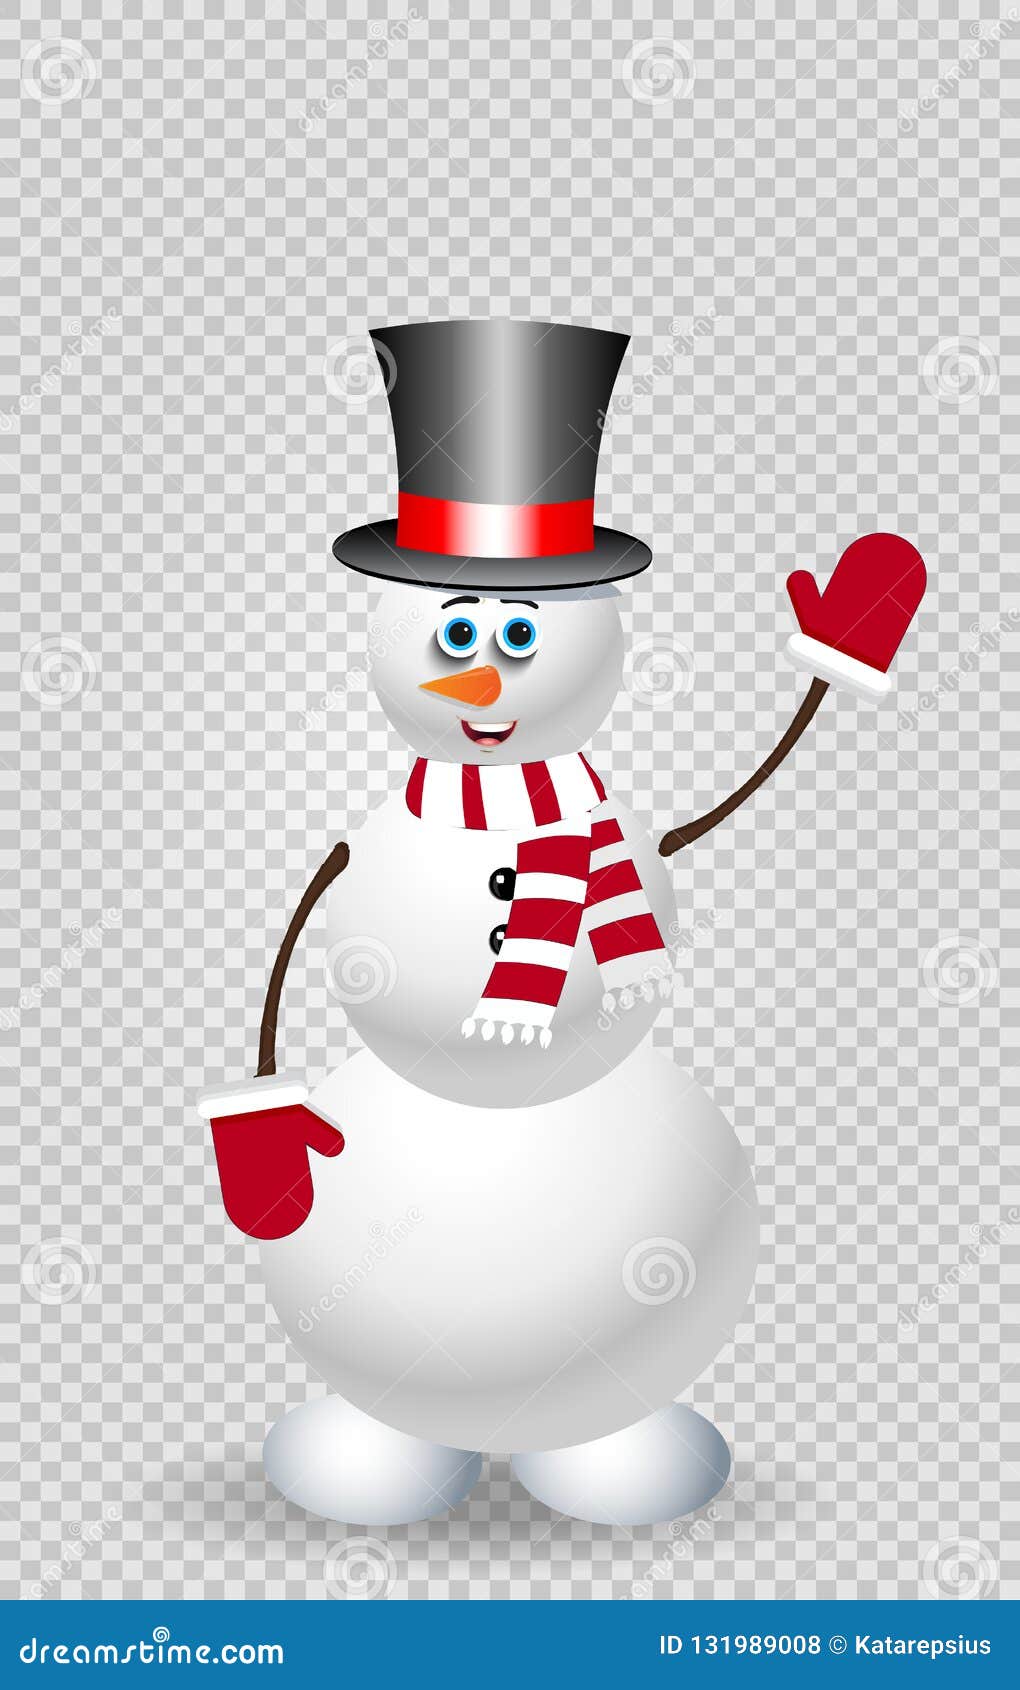 Cute Cartoon Snowman Character In Top Hat On Transparent Background Stock Vector Illustration Of Merry Isolated